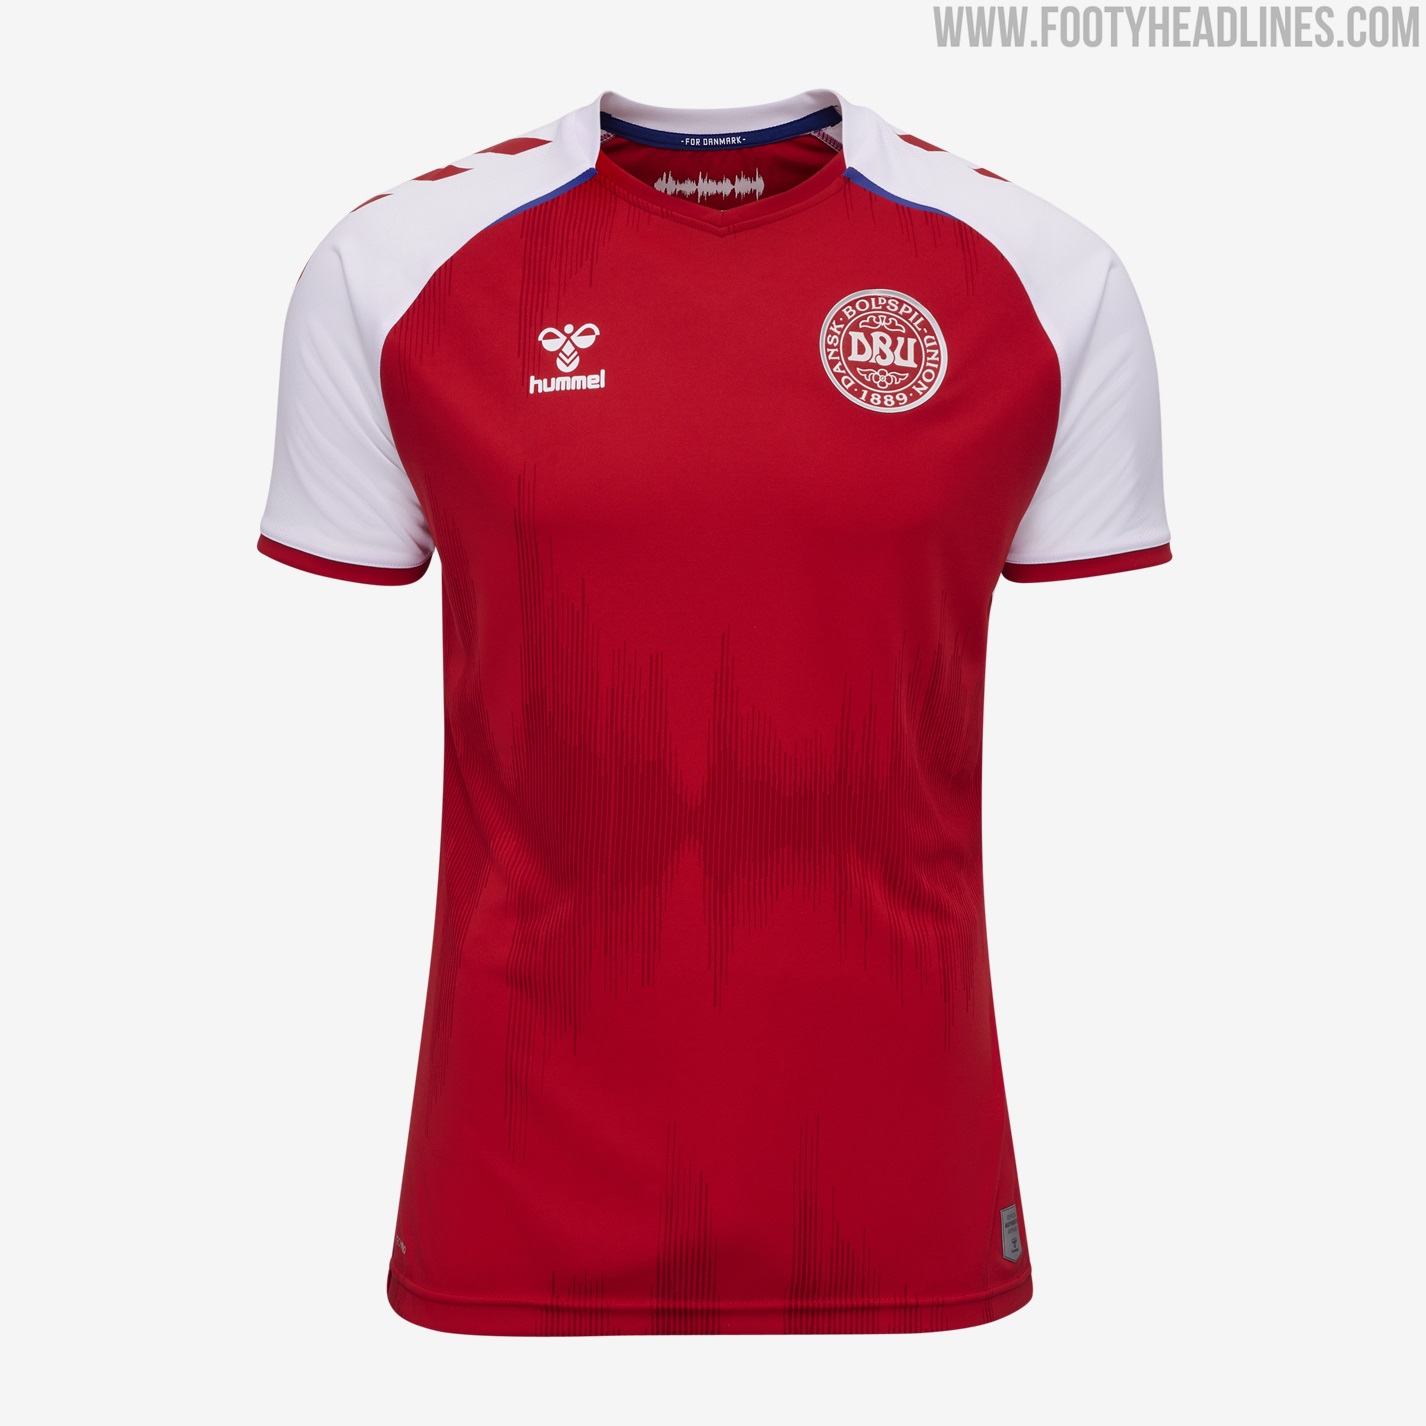 North Macedonia Euro 2020 Kit / Euro 2020 Kit Overview - Just One Team